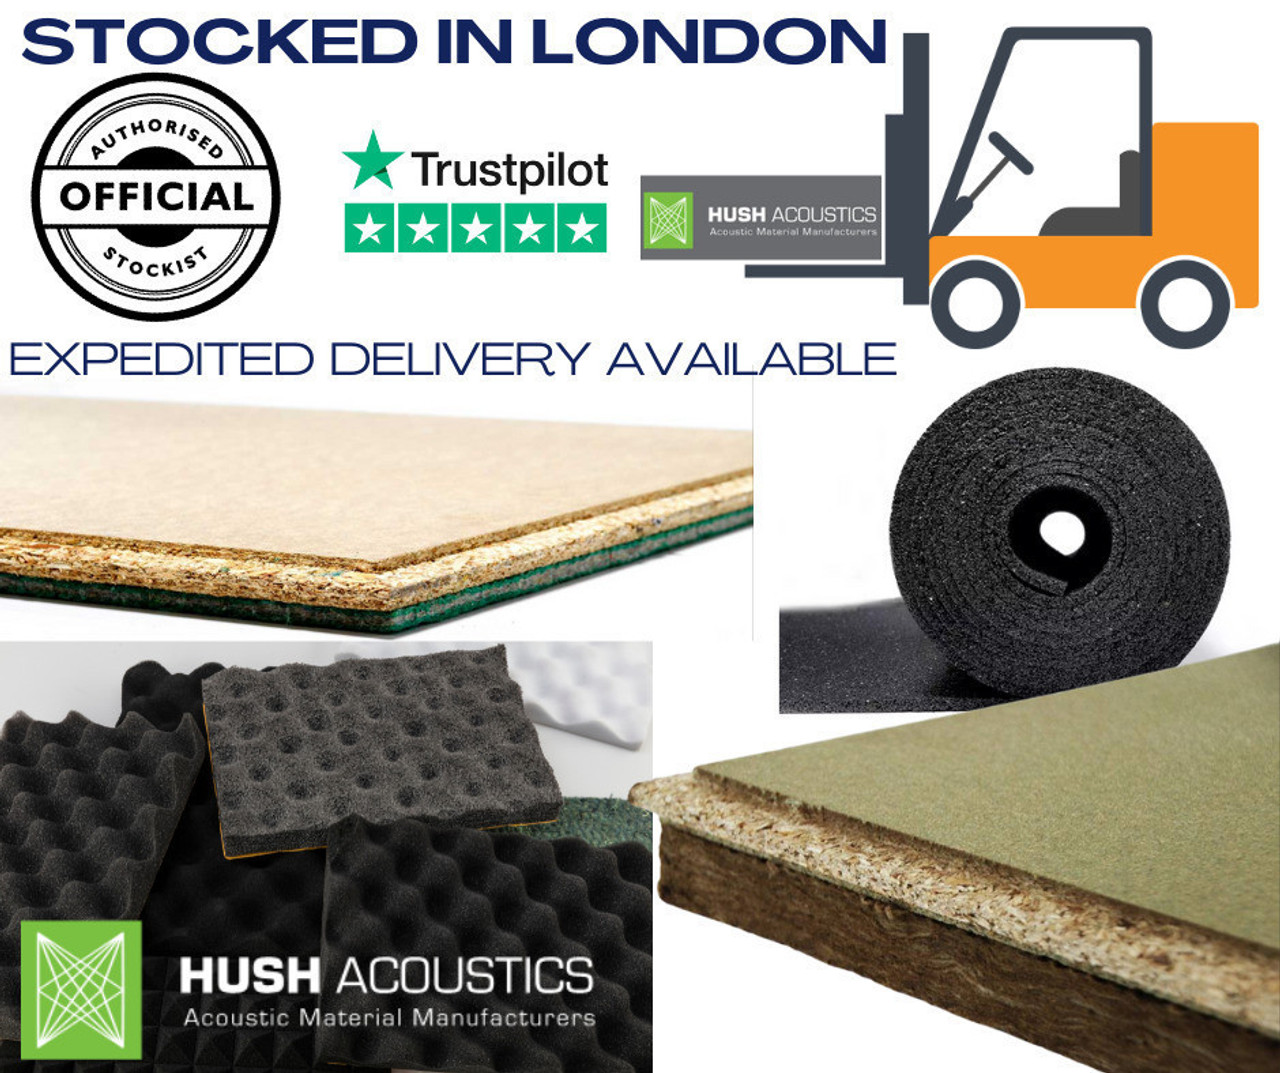 Hush CEM 22mm- Cement Particle Acoustic - High Mass Floorboard   HSH-1053-22